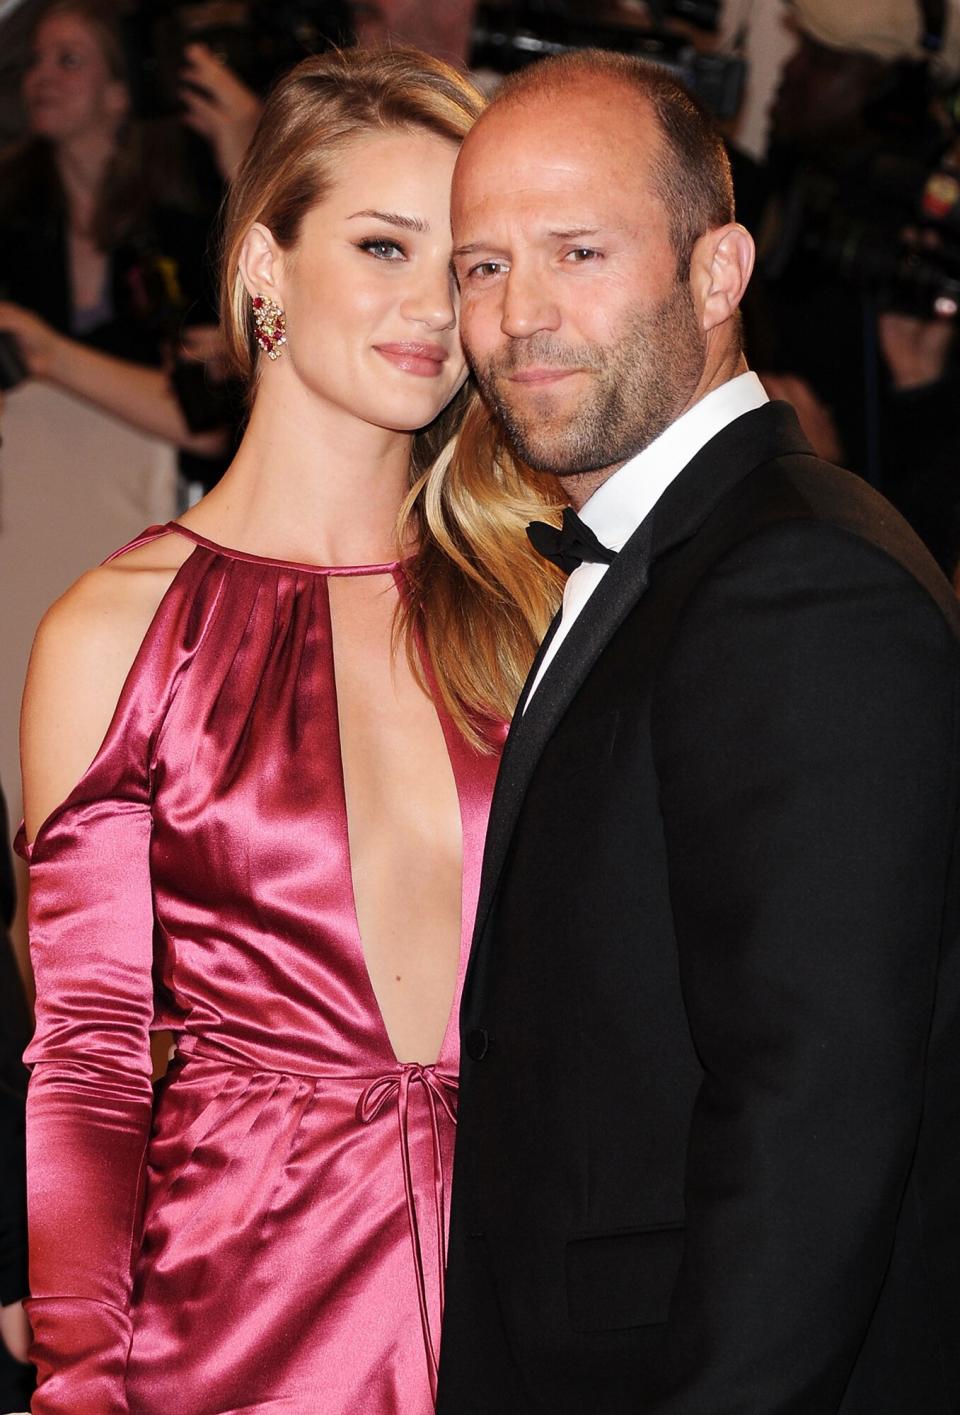 Rosie Huntington-Whiteley and actor Jason Statham attend the "Alexander McQueen: Savage Beauty" Costume Institute Gala at The Metropolitan Museum of Art on May 2, 2011 in New York City